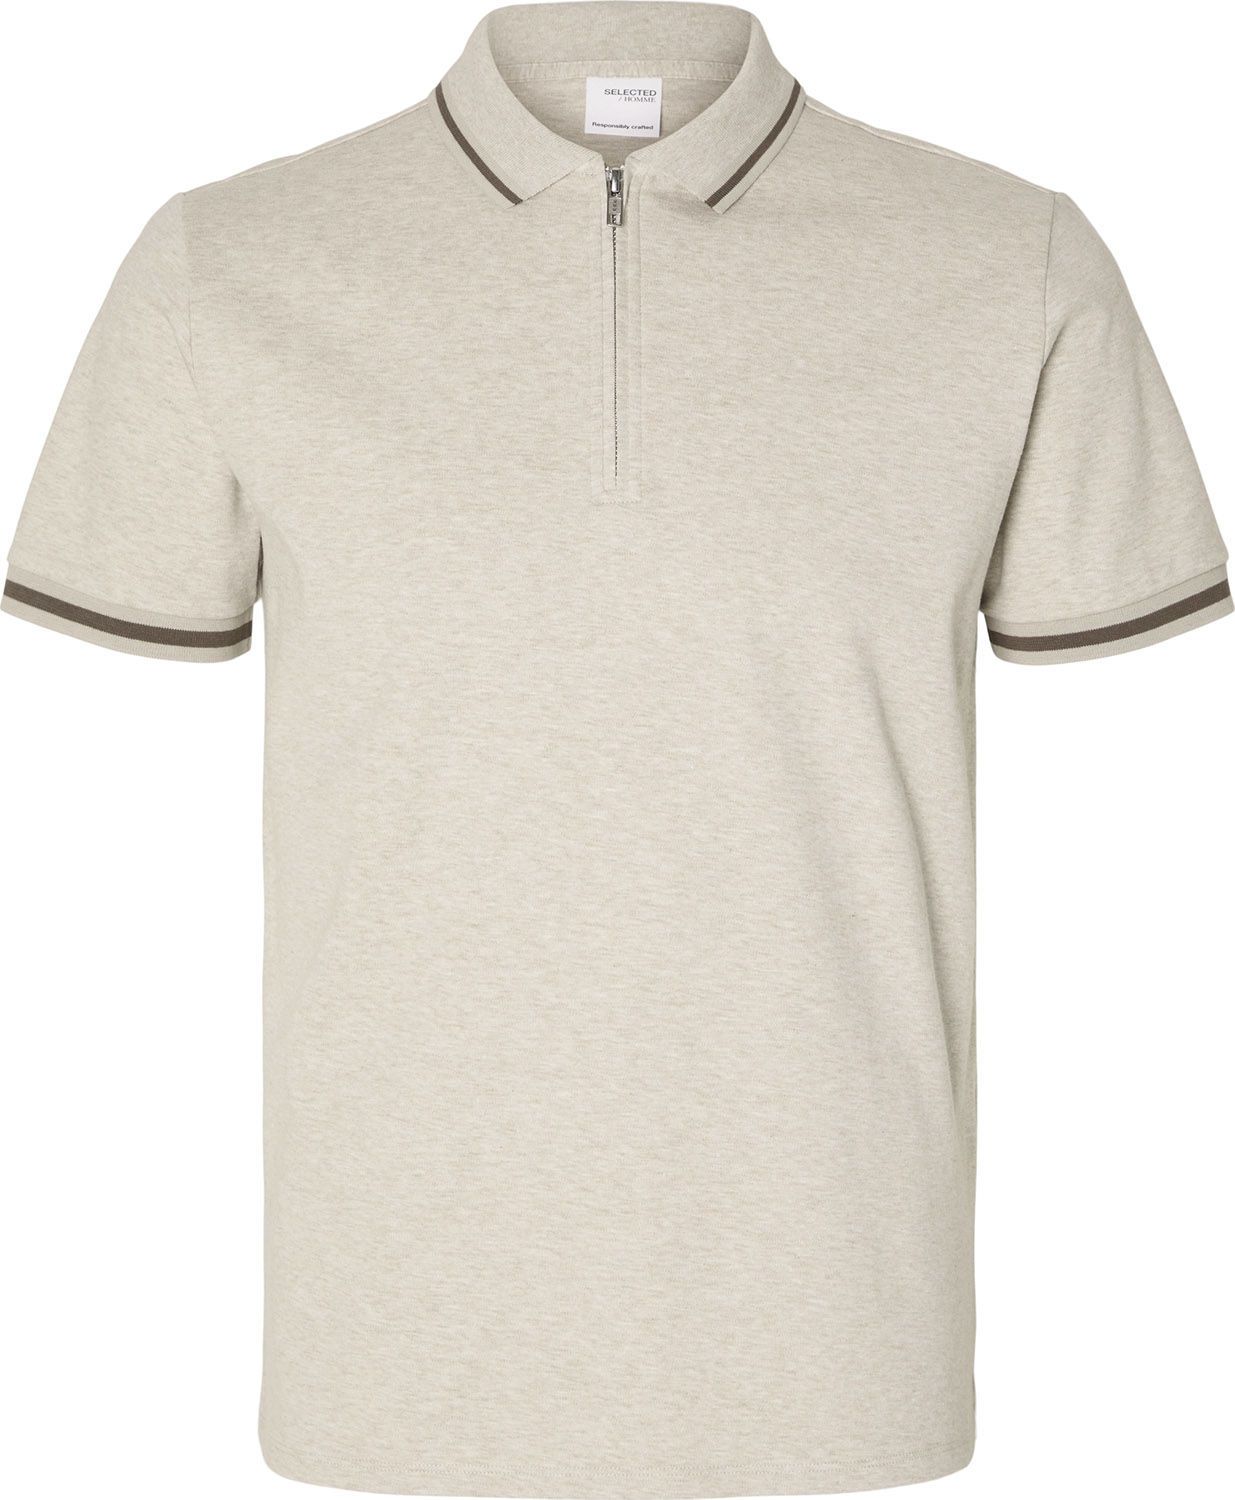 Selected Homme Poloshirt Toulouse Zand